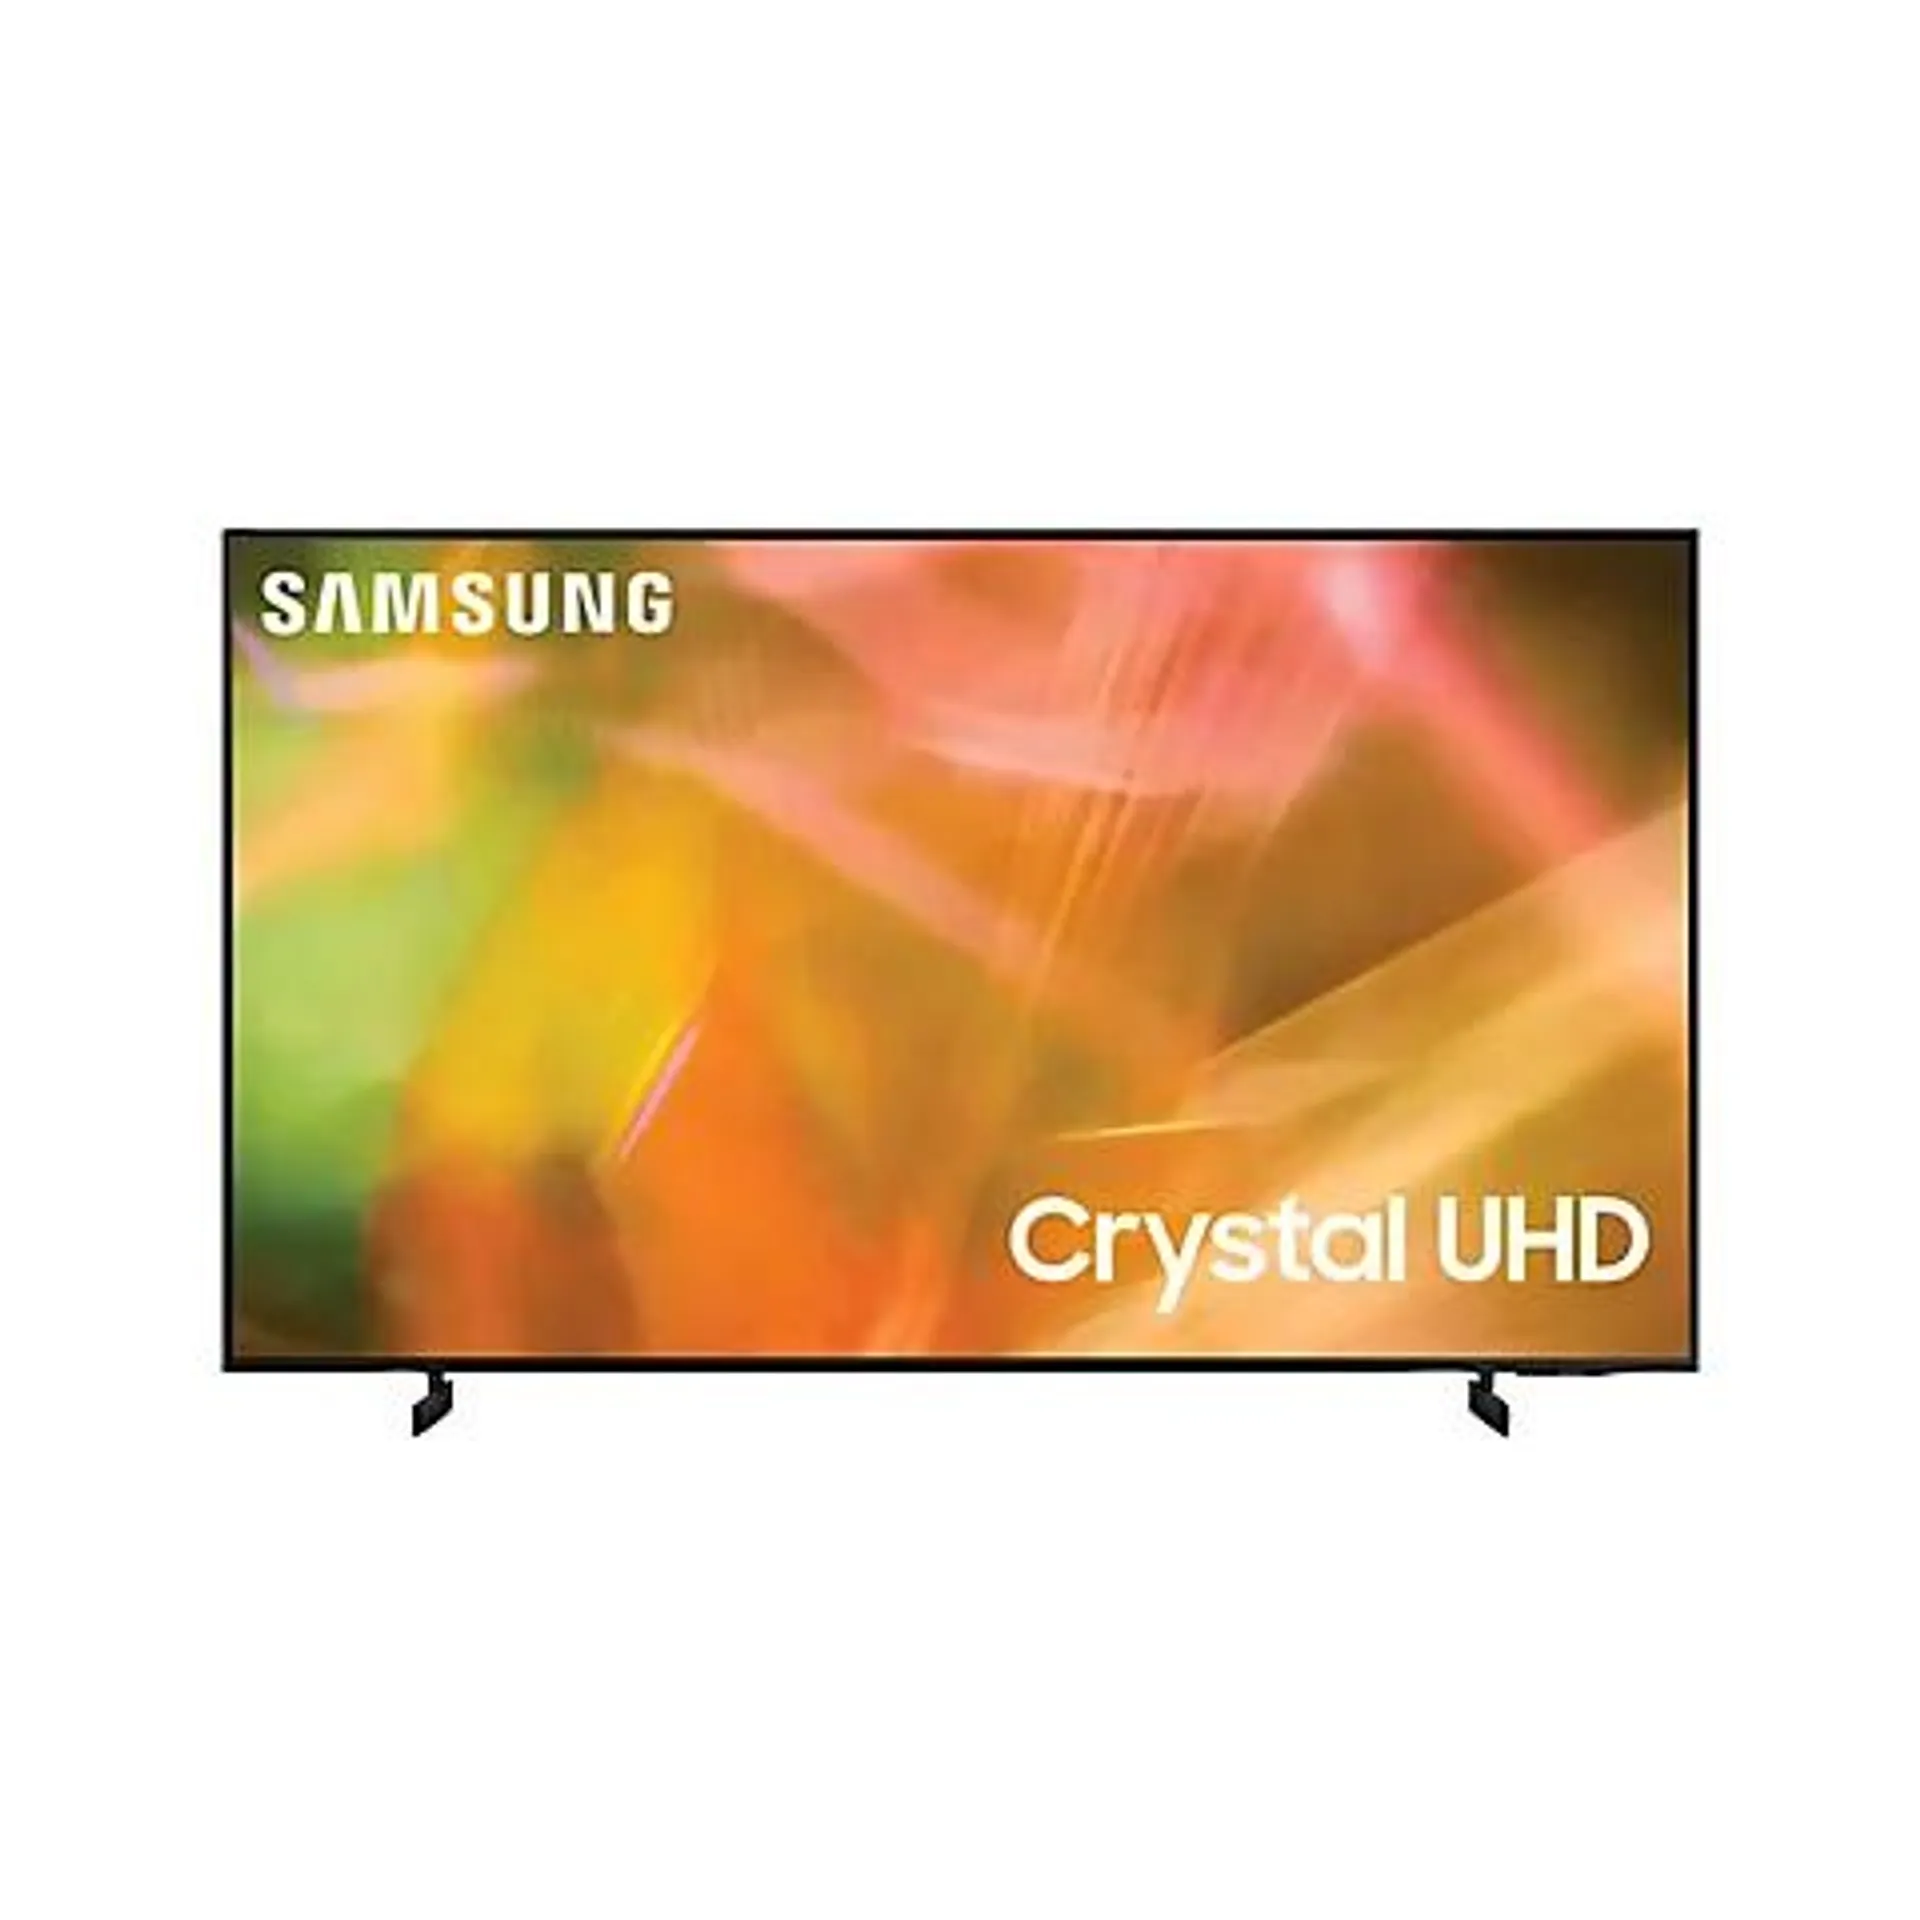 Samsung 75" AU800D Crystal UHD 4K Smart TV with 4-Year Coverage